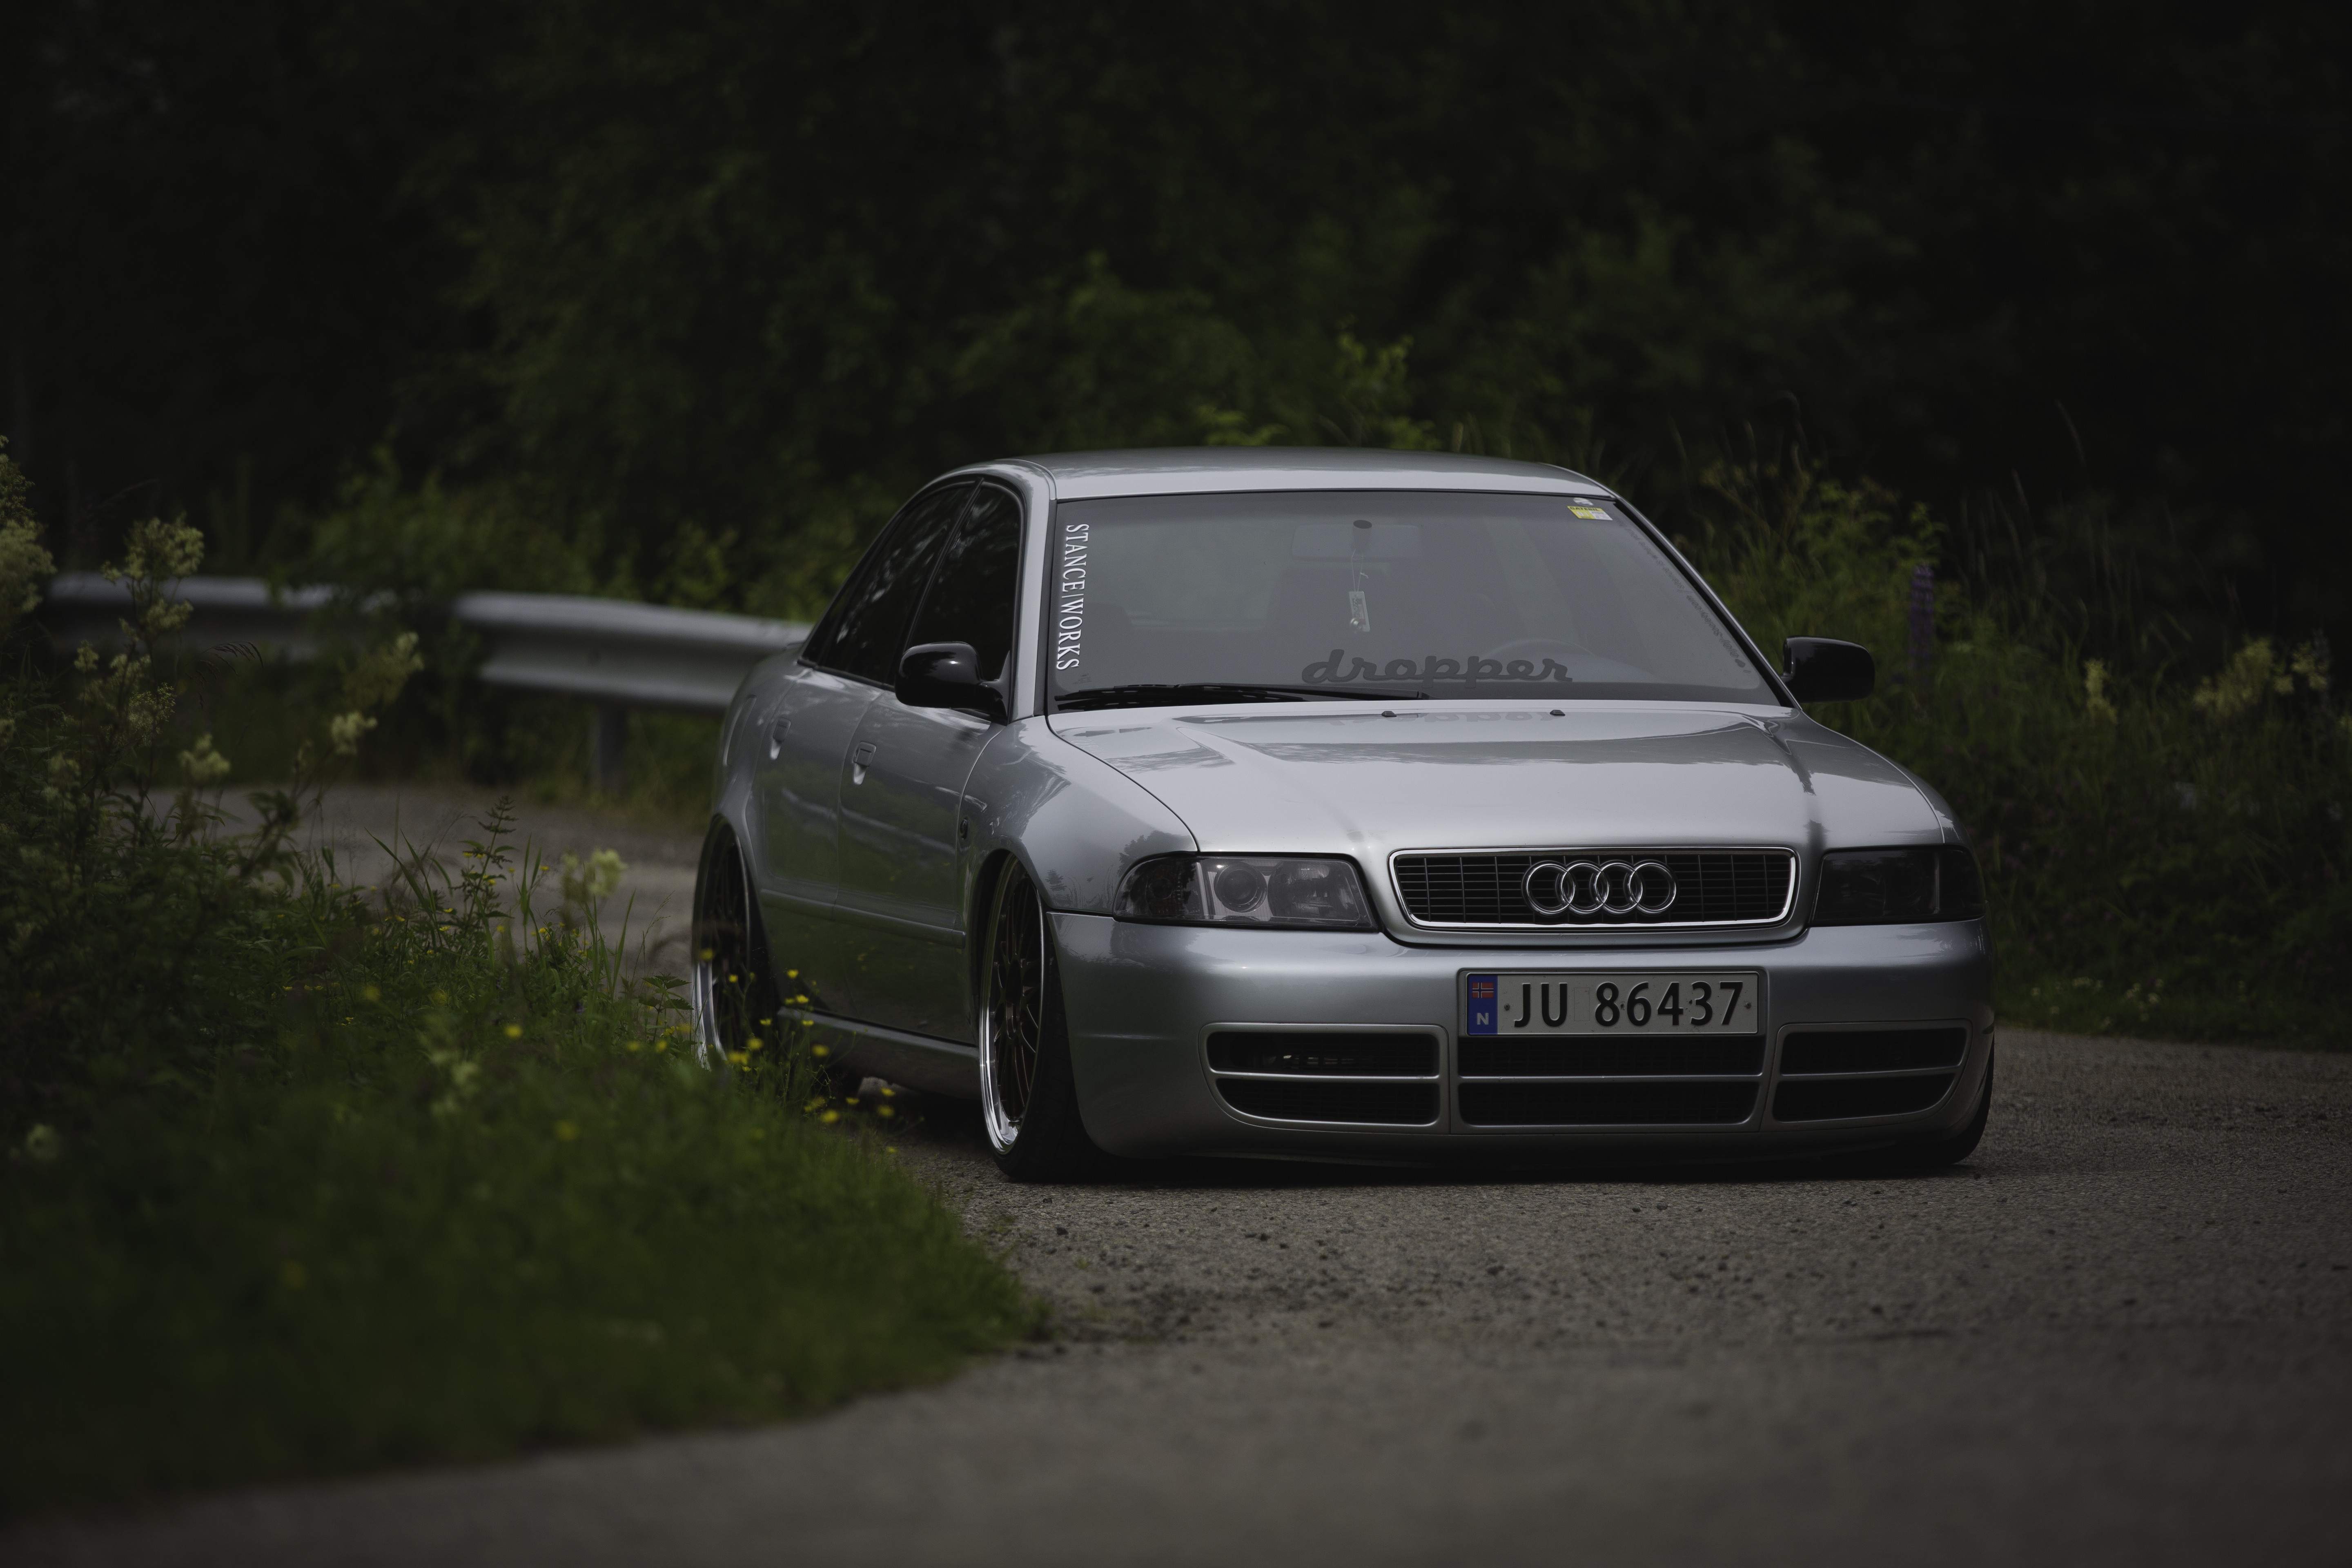 Audi A4 Stanceworks Norway Low Audi RS4 Lowered Stance 5760x3840